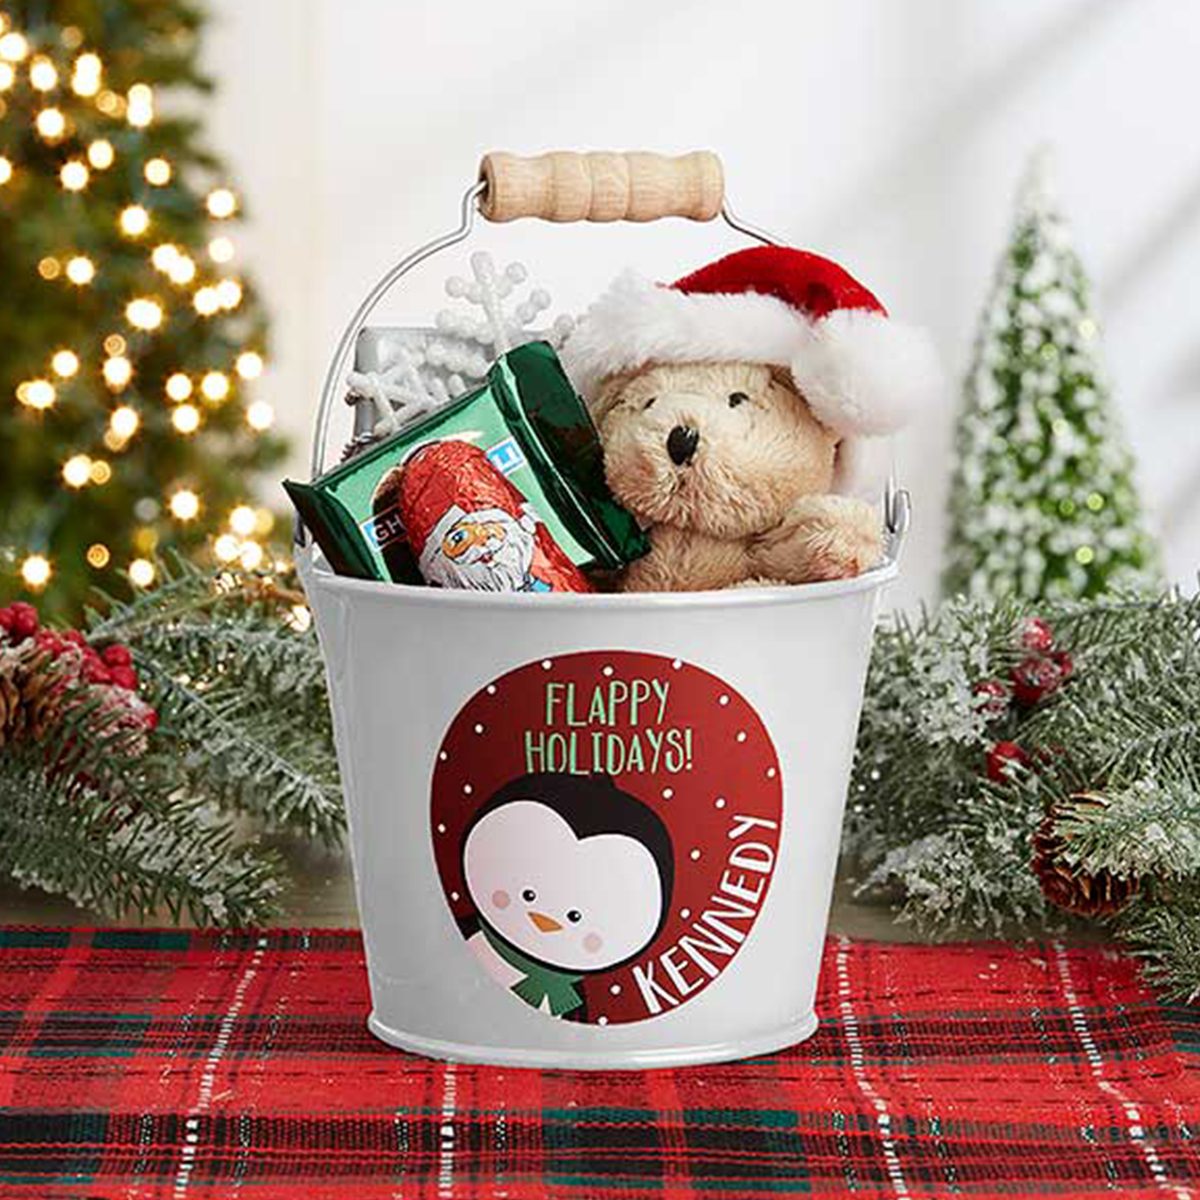 https://www.tasteofhome.com/wp-content/uploads/2022/12/Holly-Jolly-Characters-Basket_ecomm_via-personalizationmall.com_.jpg?fit=700%2C700